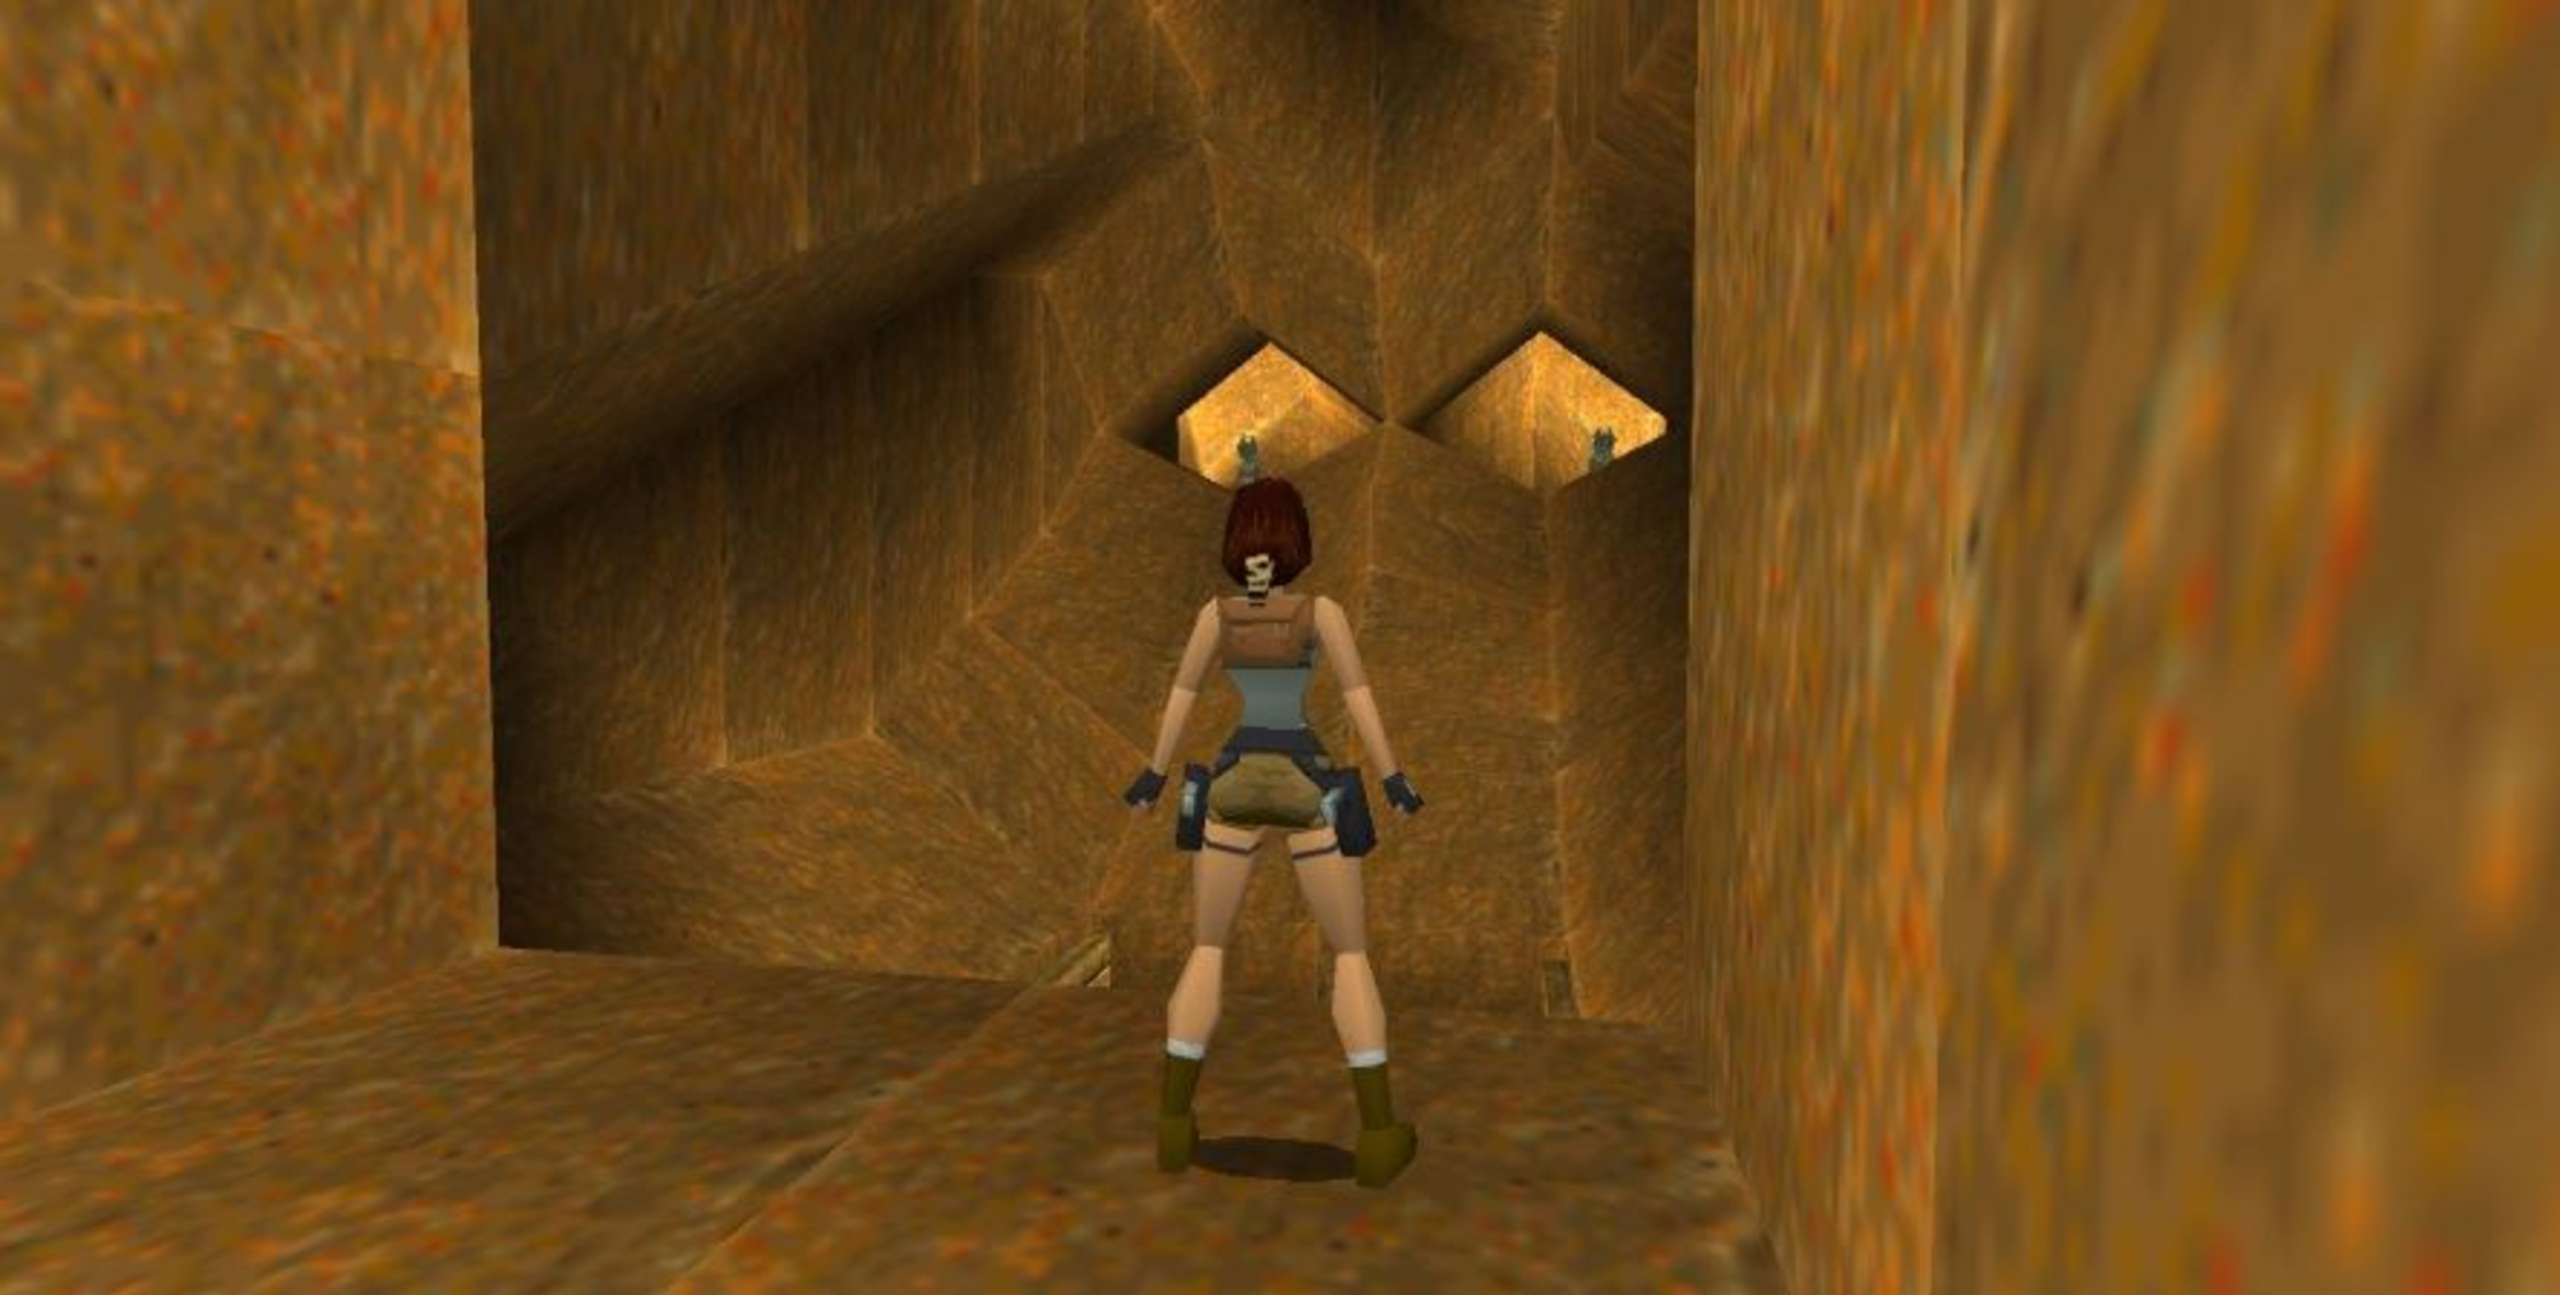 Tomb Raider Fan Is Recreating The Original, One Of The Most Significant 3D Adventure Games Of Its Time